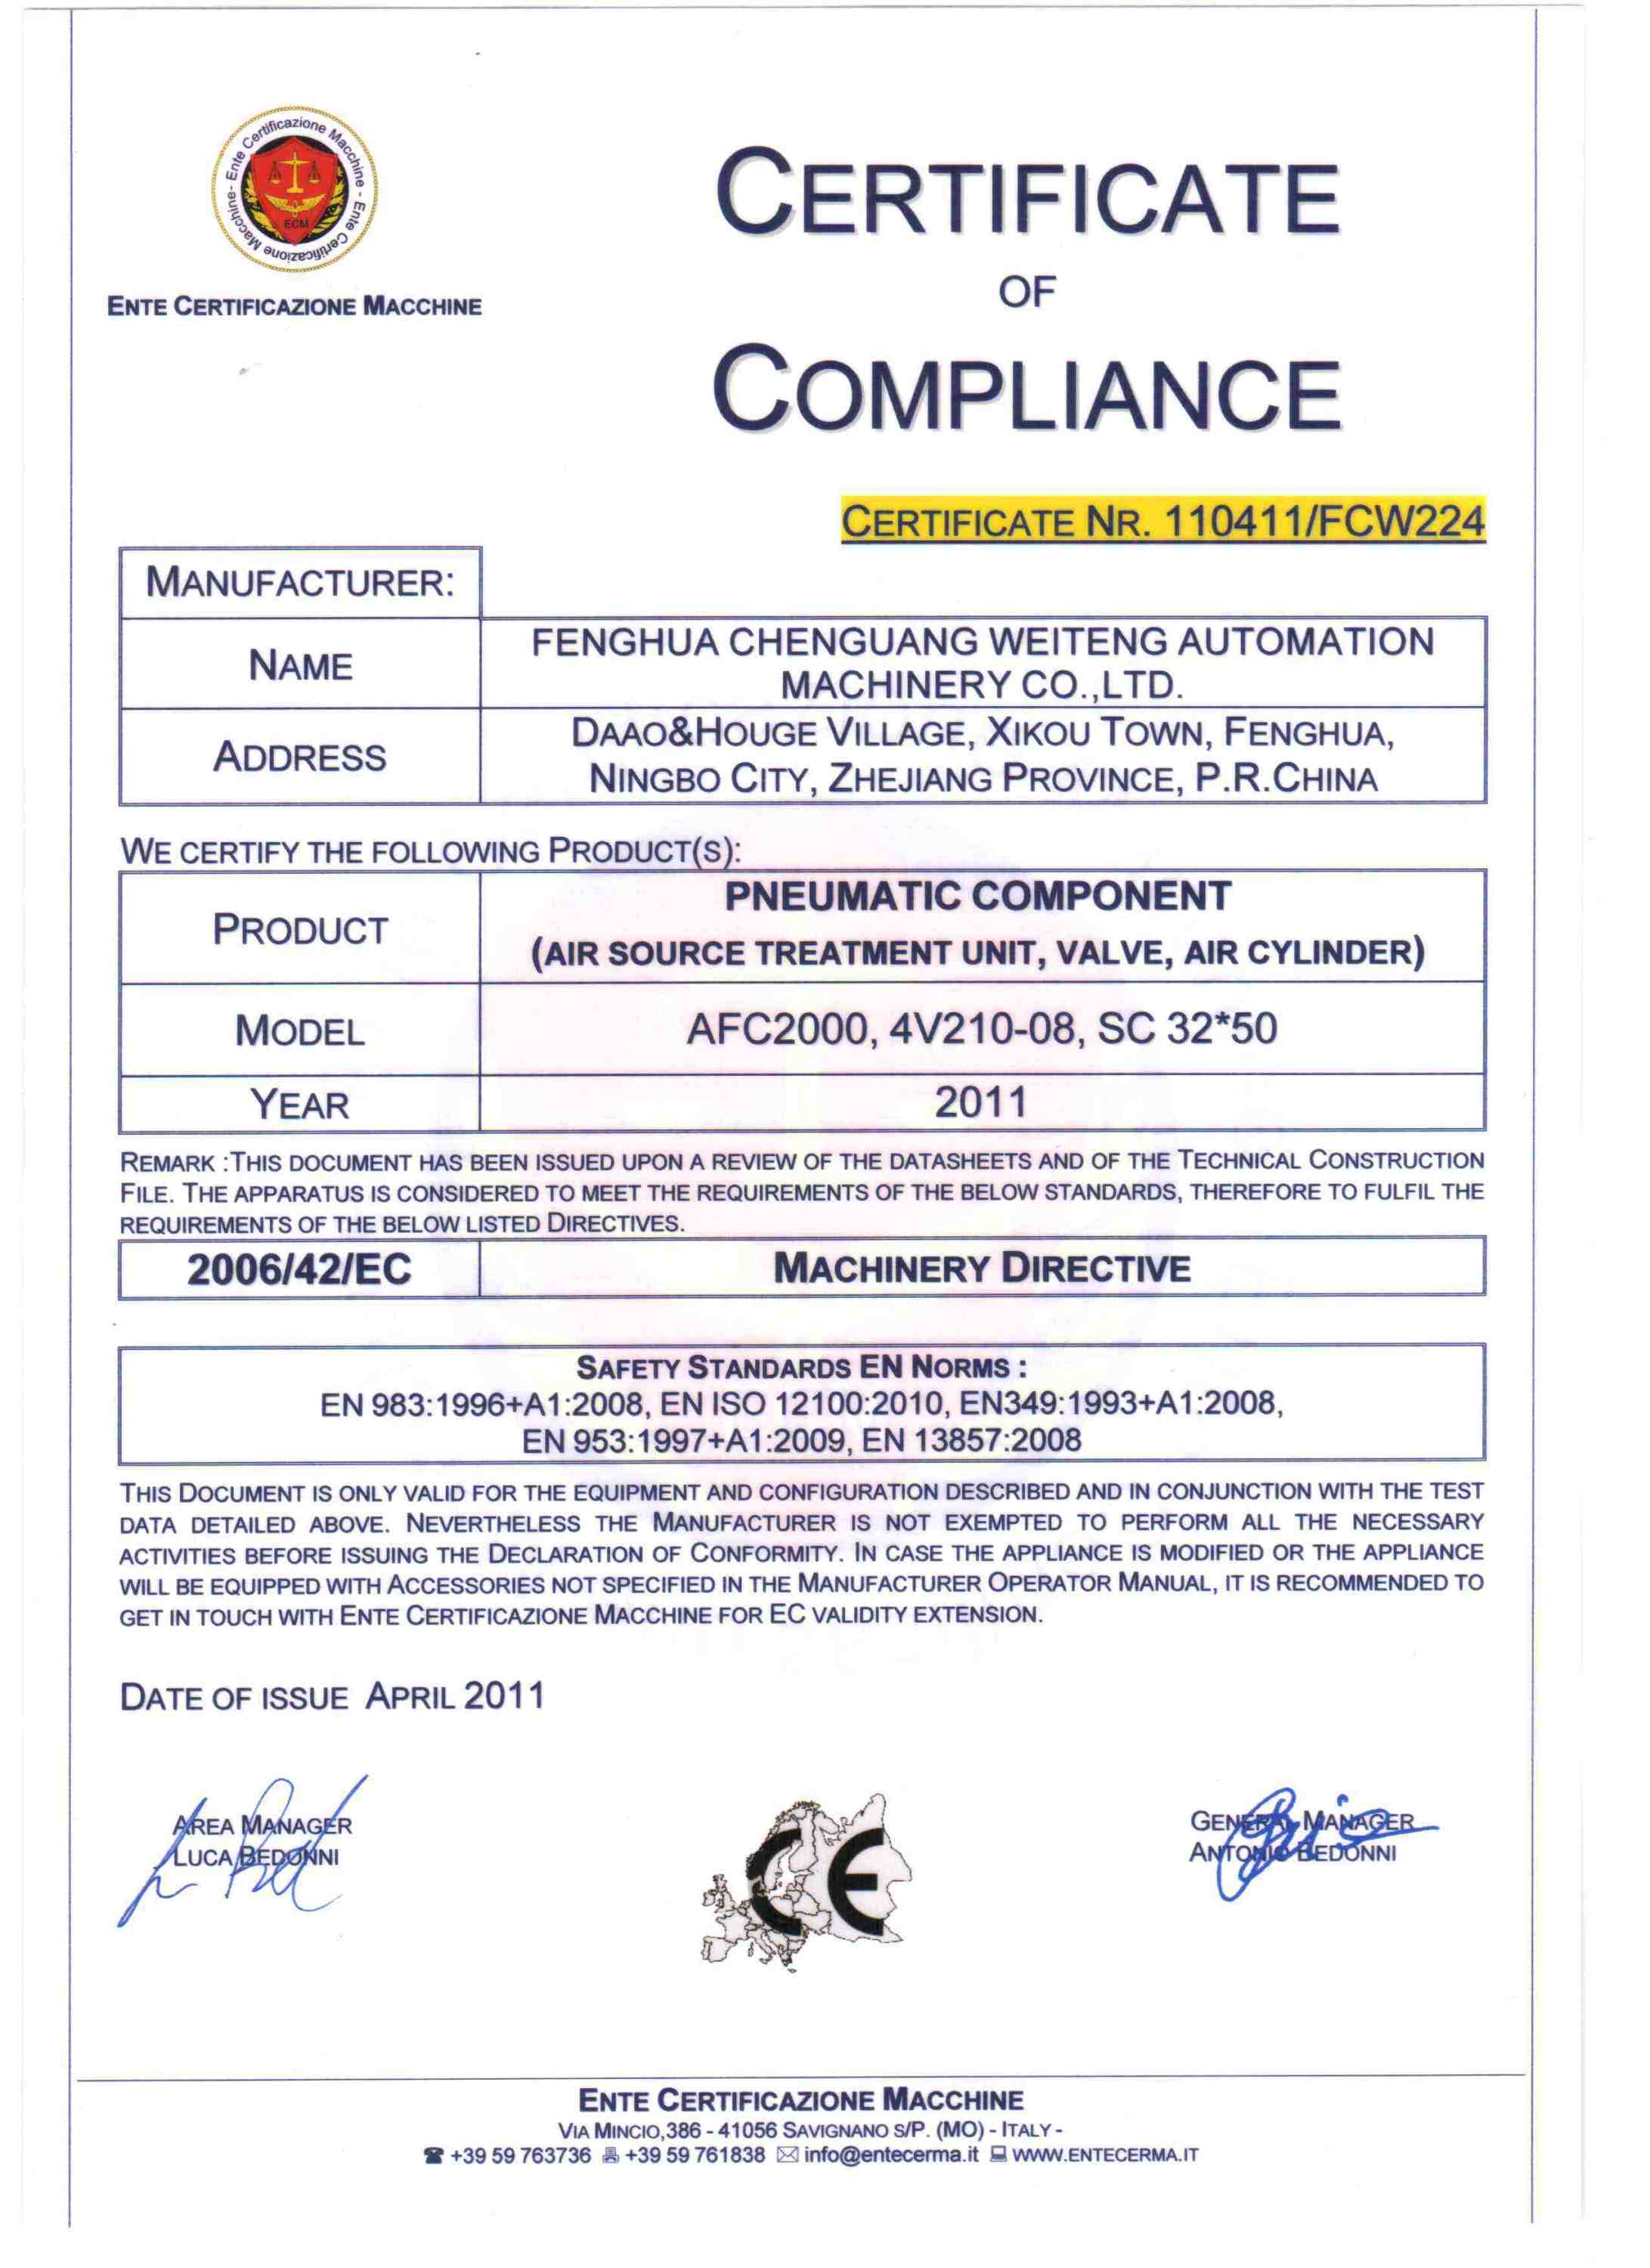 CE Certification FengHua ChenGuang WeiTeng Automation Machinery Co Ltd